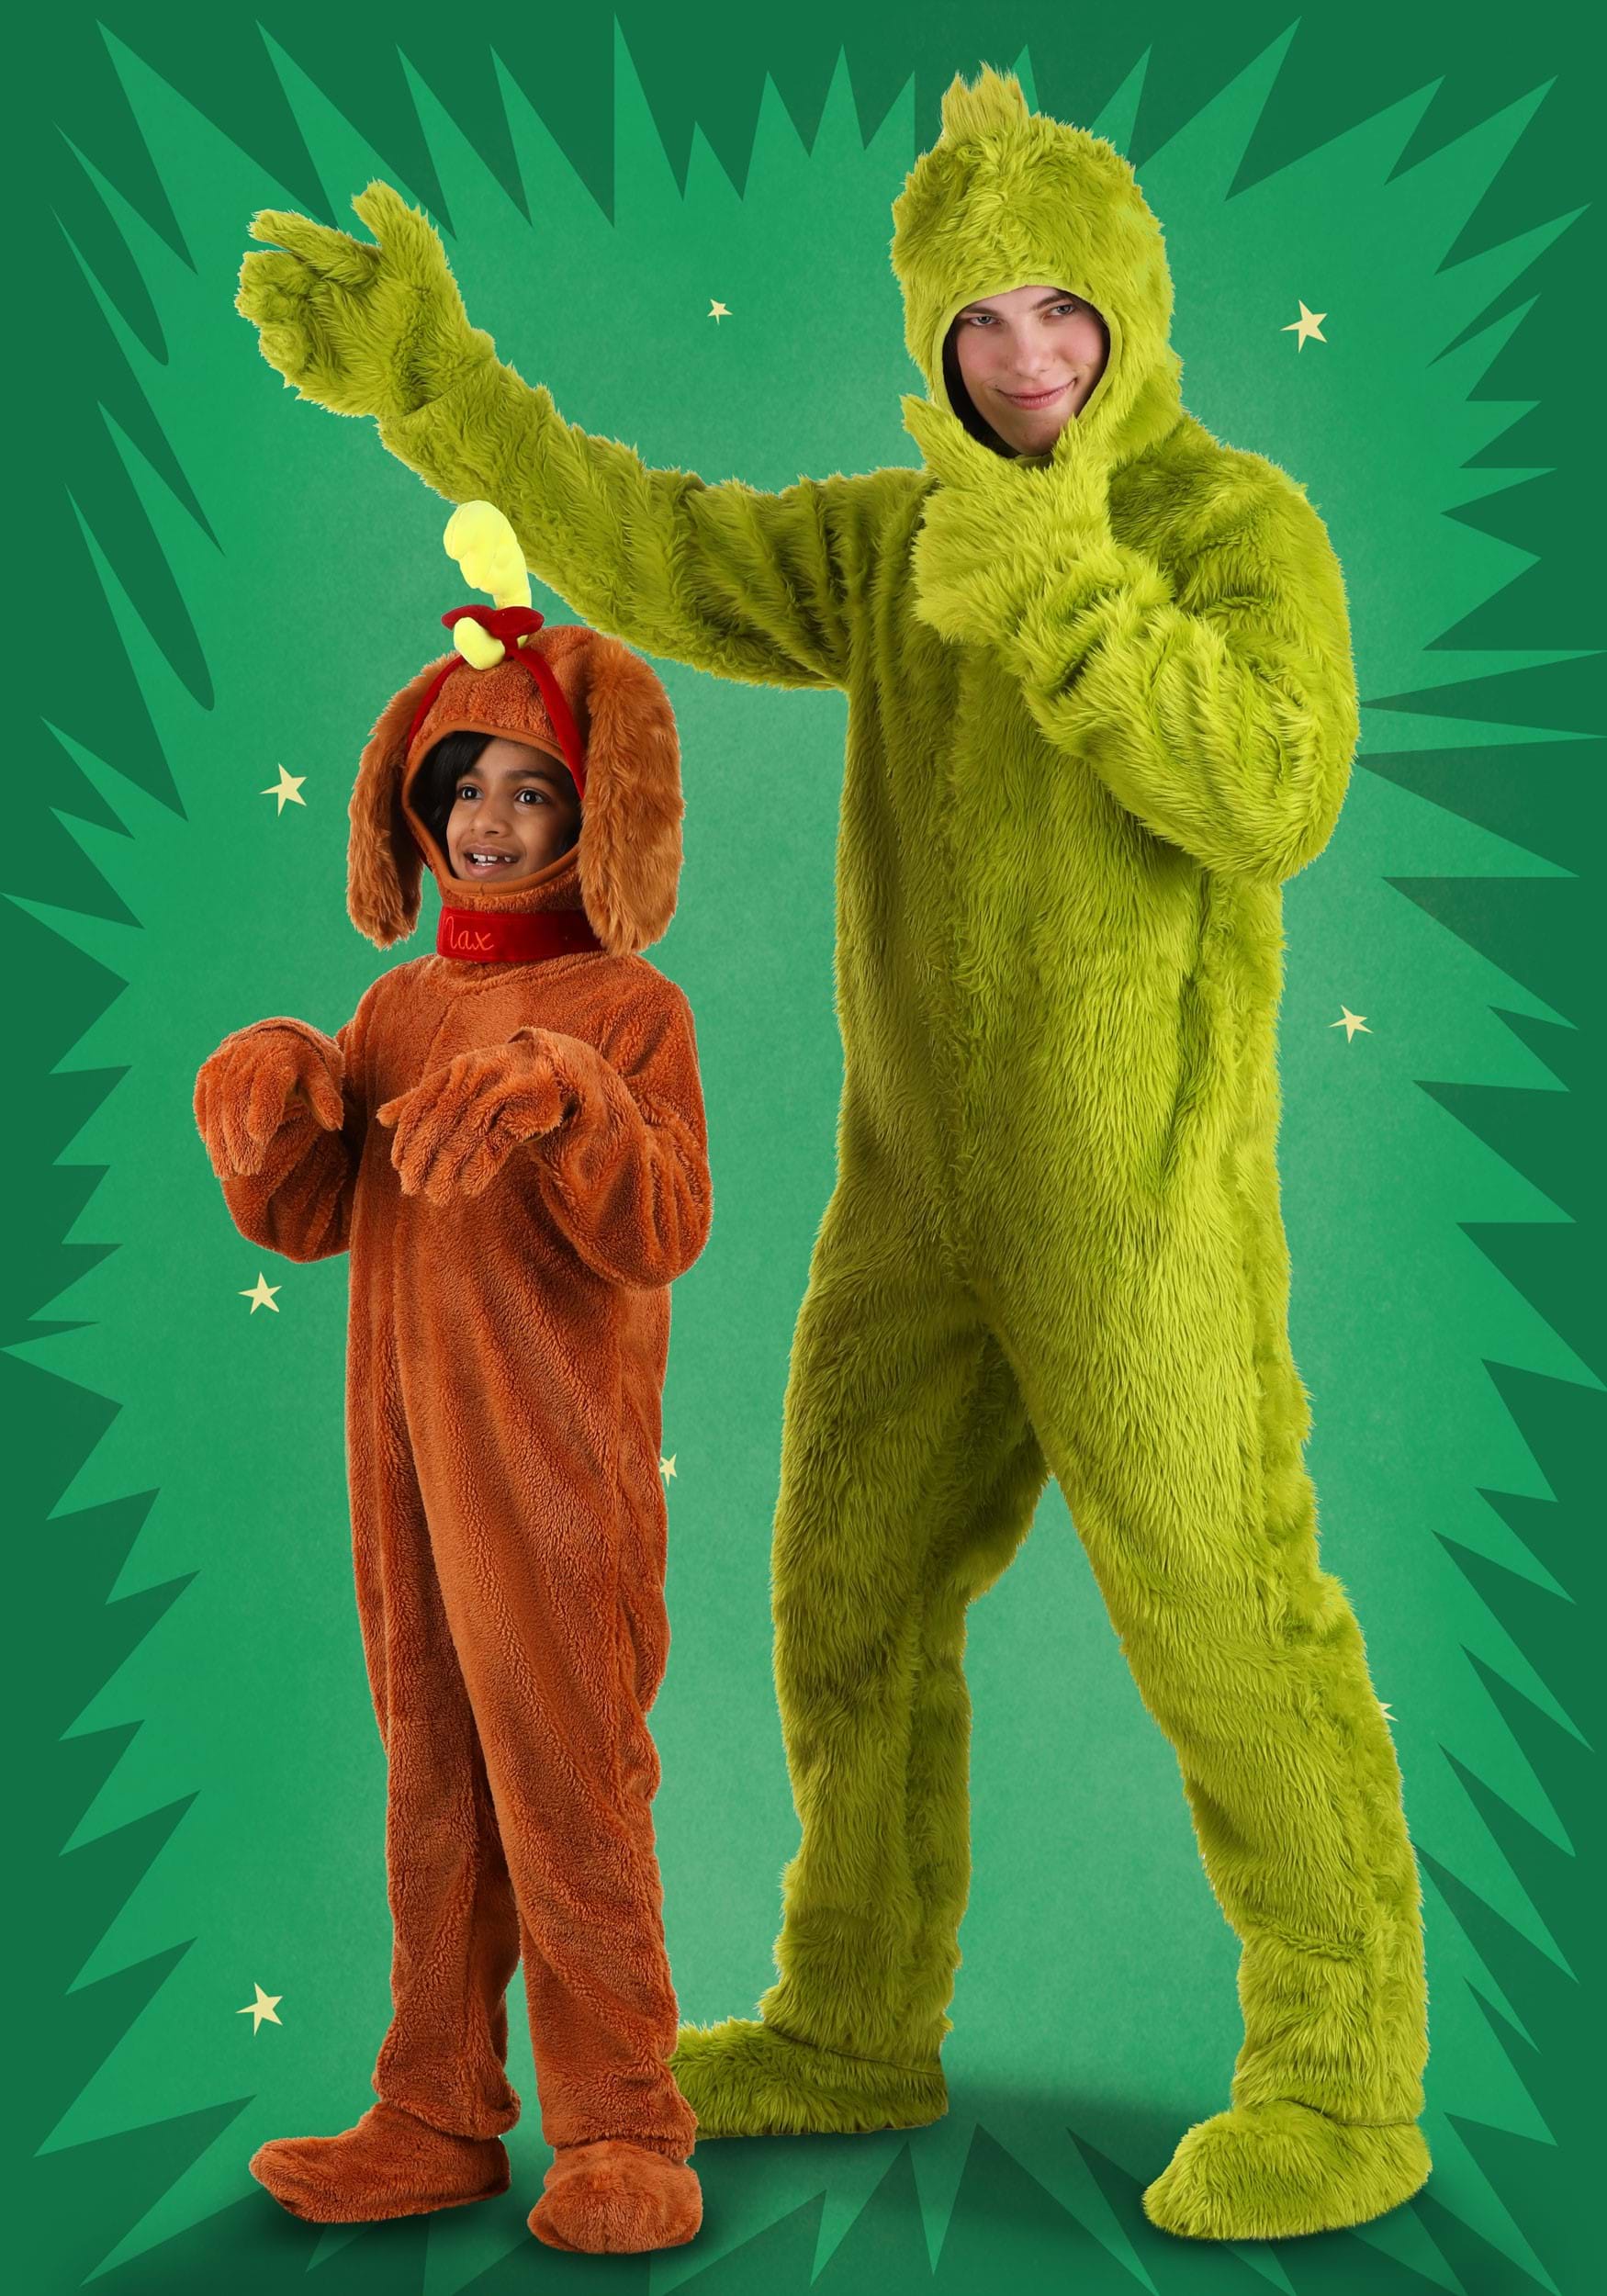 The grinch makeup, Grinch costumes, Christmas character costumes